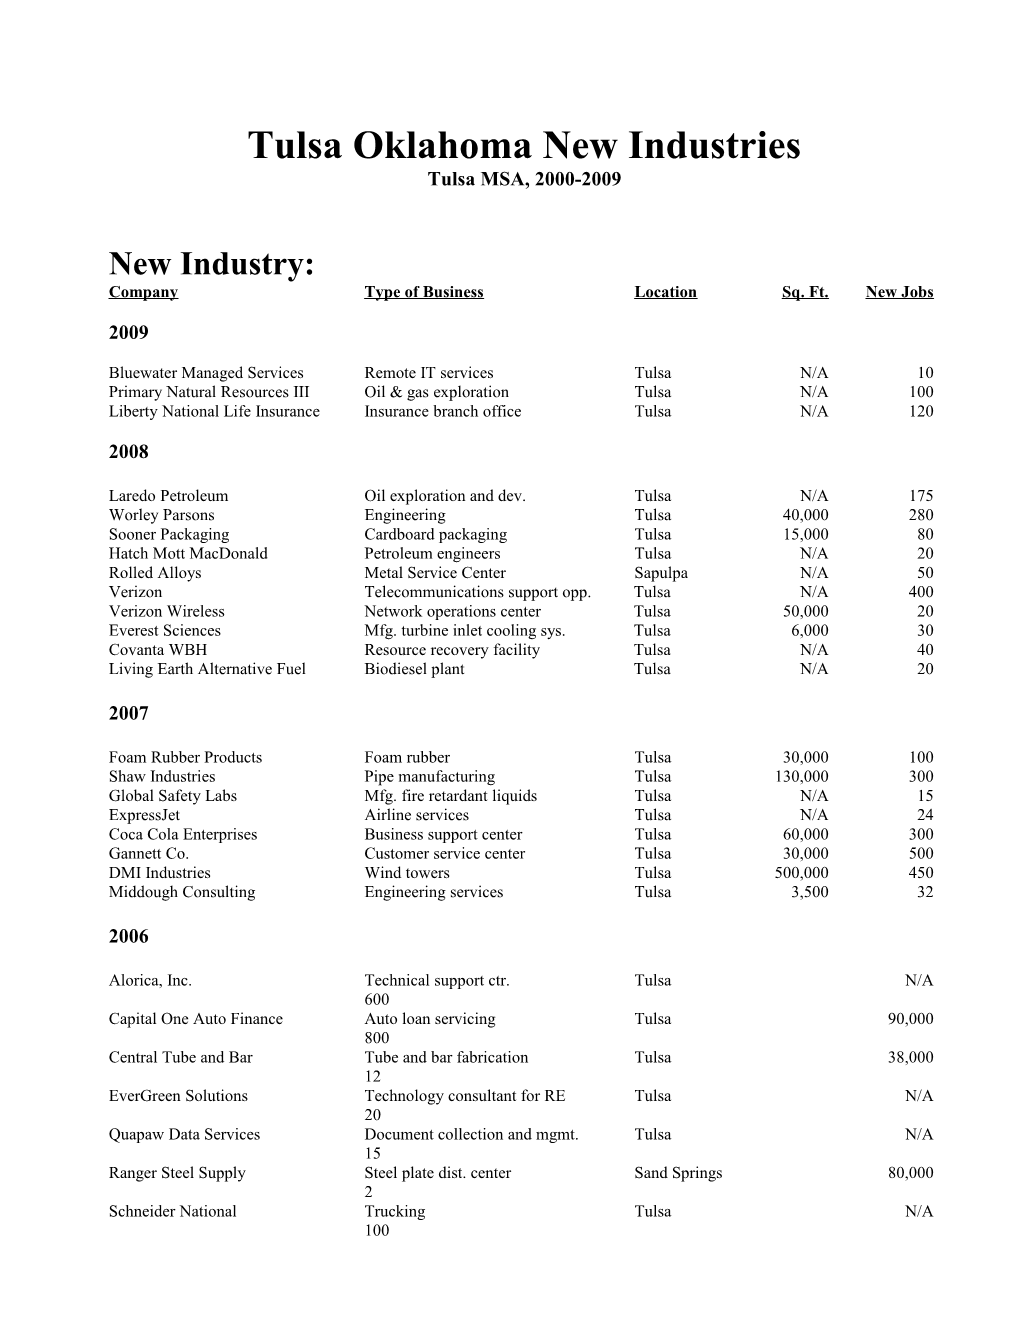 New and Expanded Industries